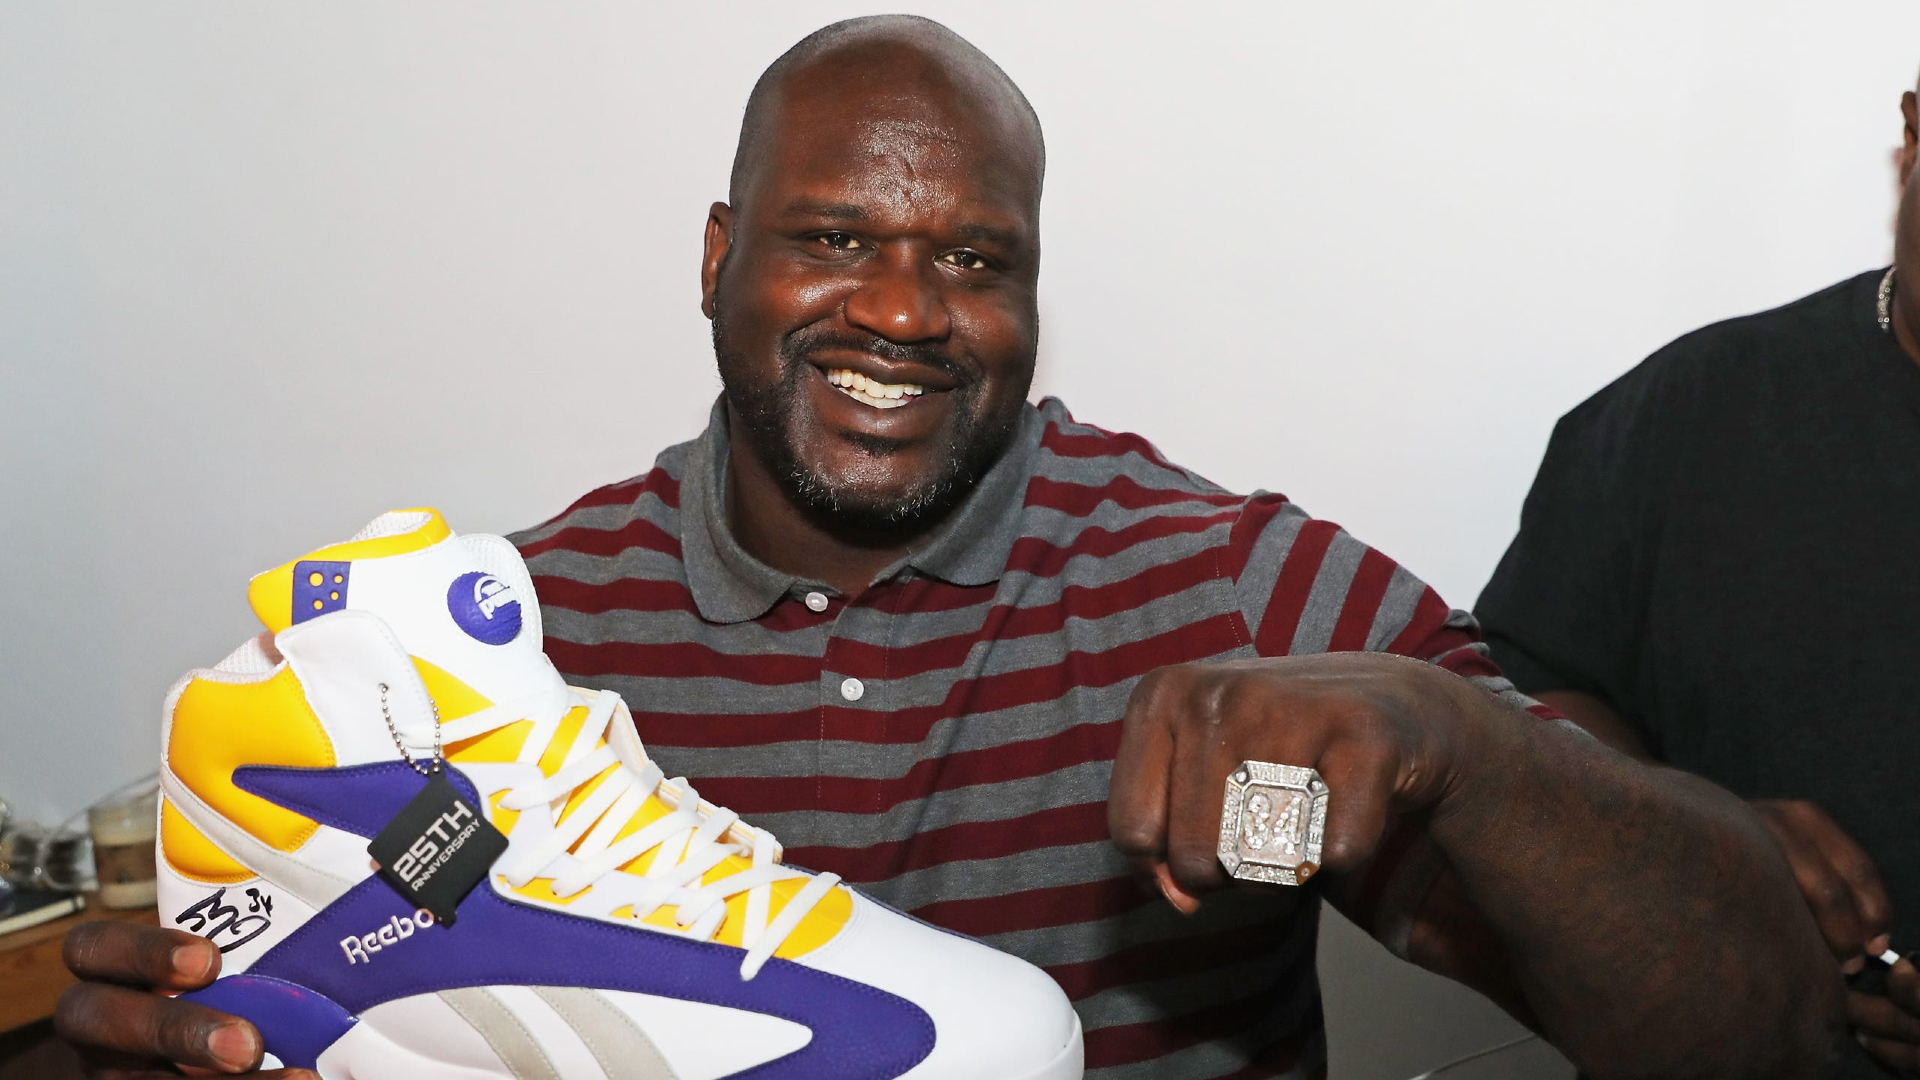 The Noble Reason Why Shaq Gave Up His $40 Million Reebok Deal